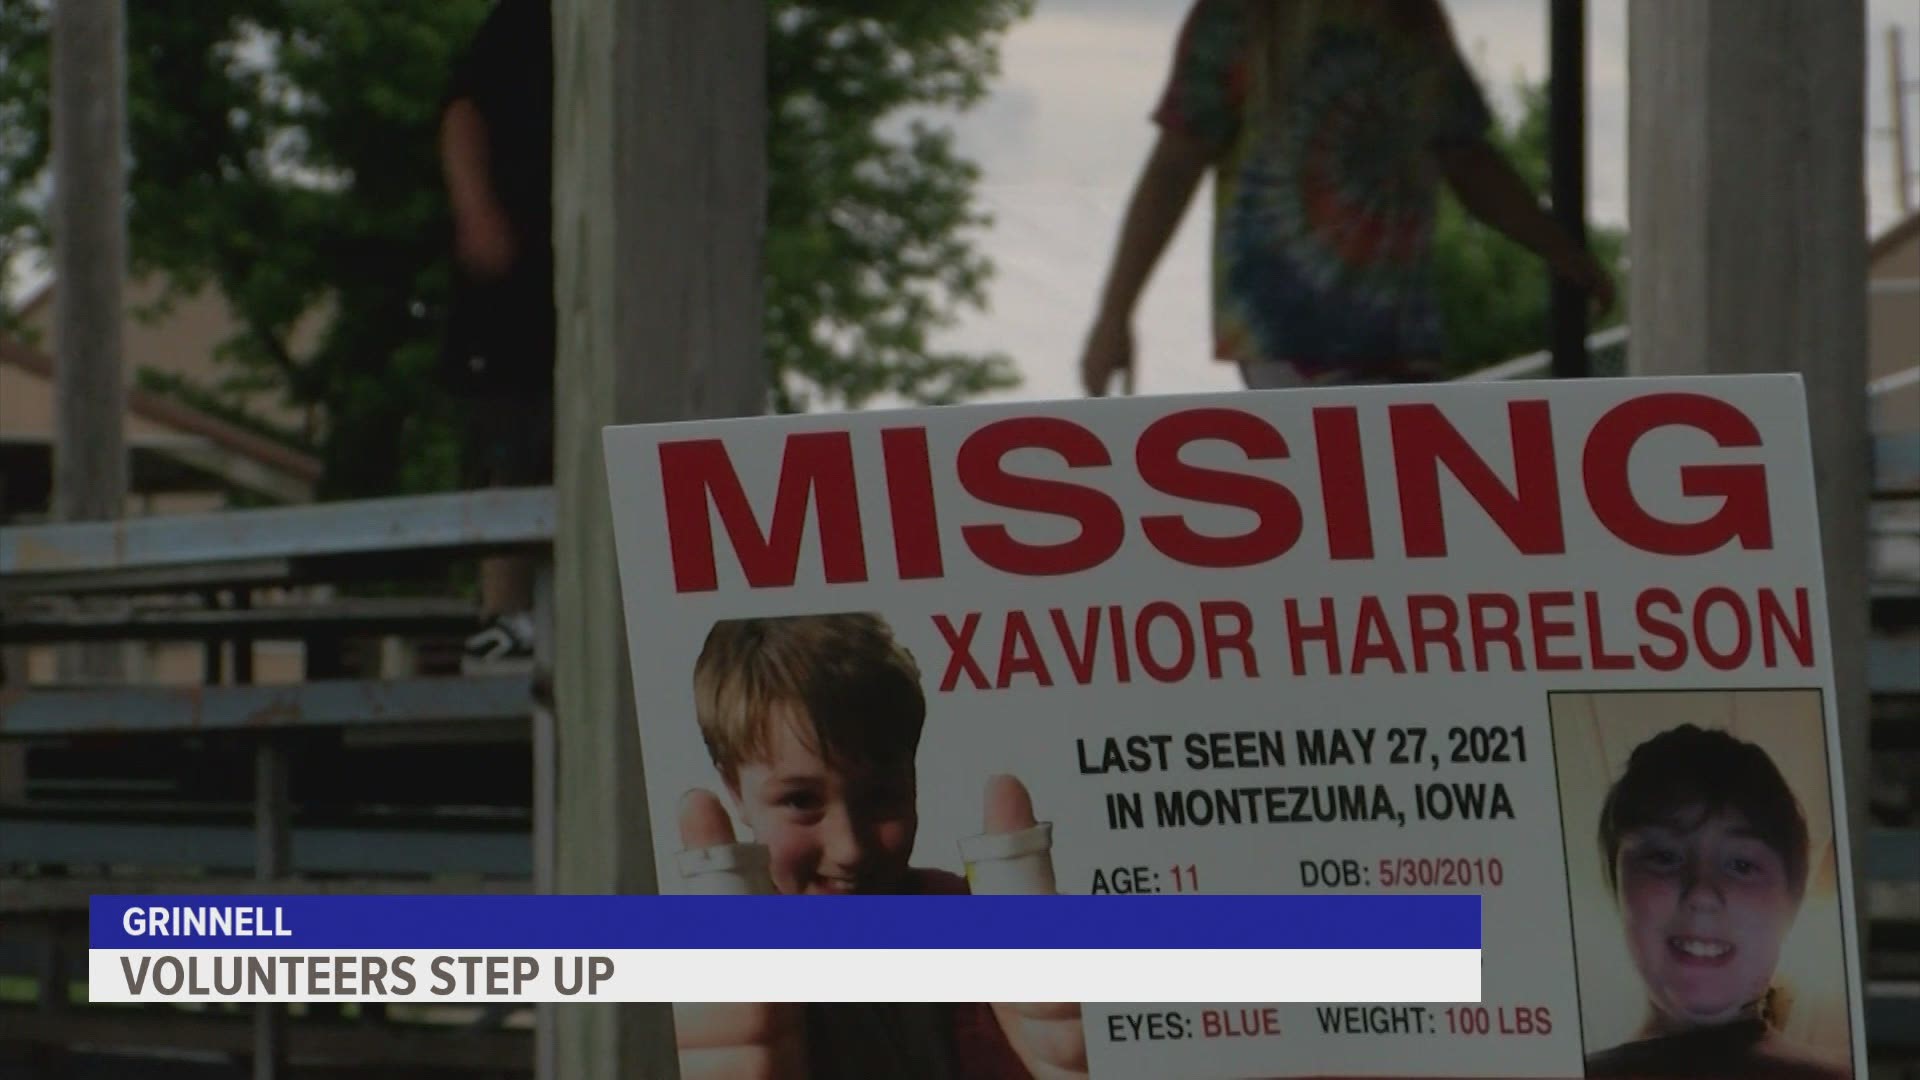 11-year-old Xavier Harrelson has been missing for over a month. The money raised on Tuesday will go towards a growing reward fund.